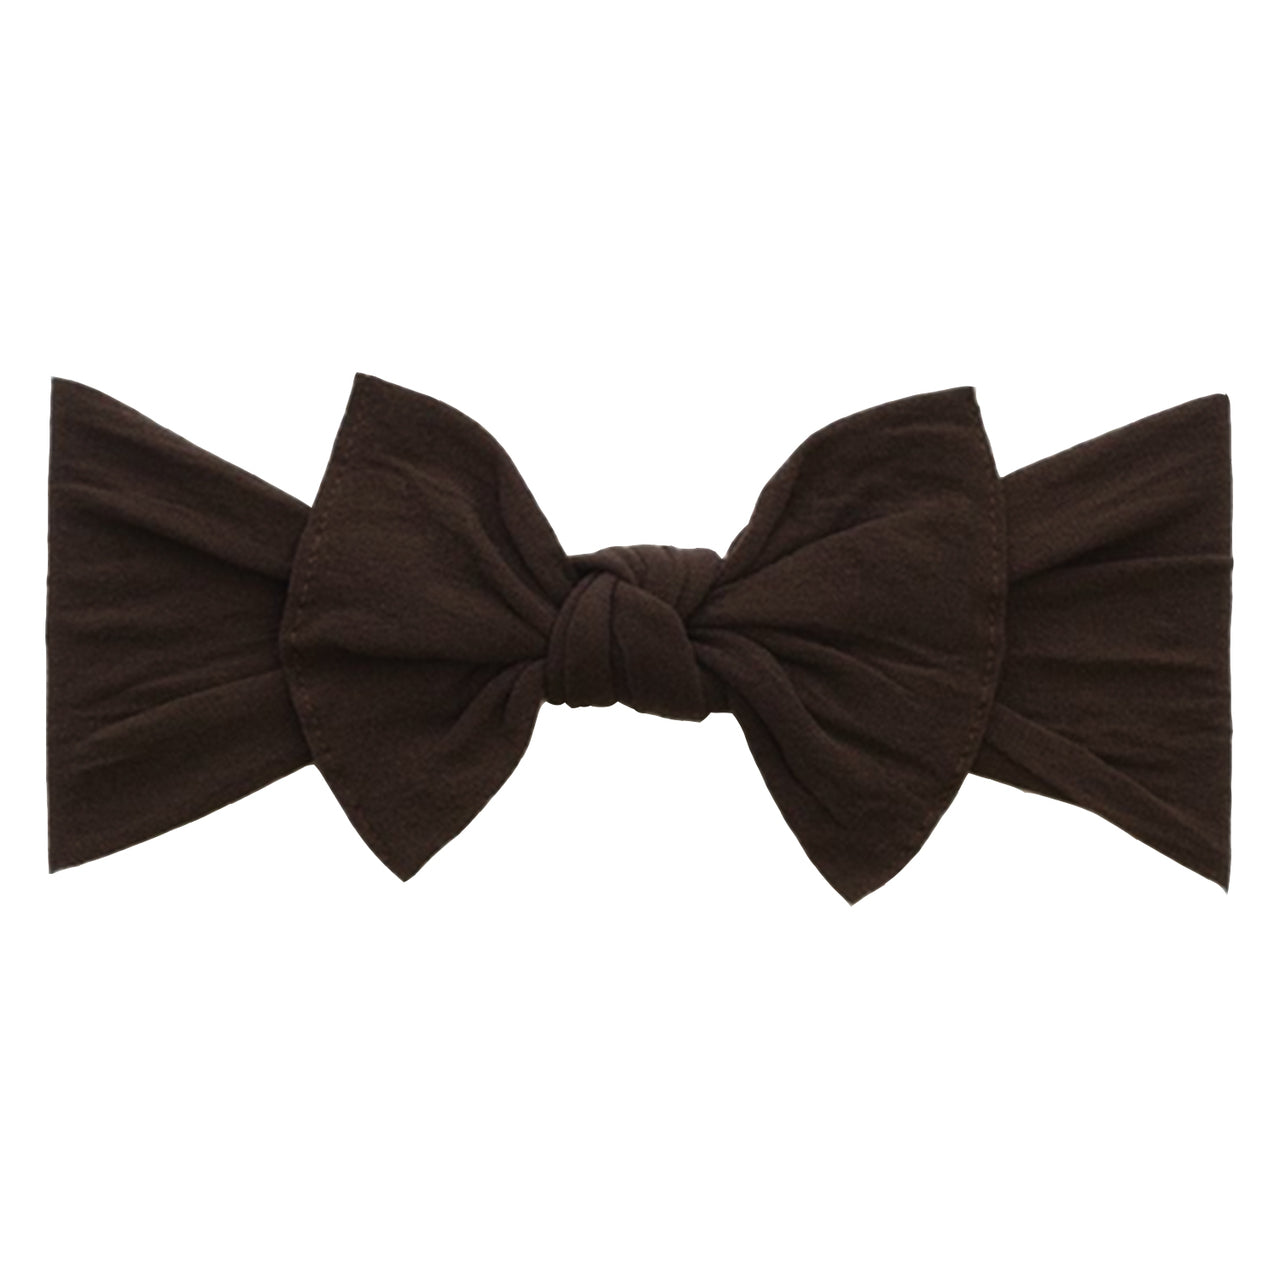 SpearmintLOVE’s baby Knot Bow, Brown